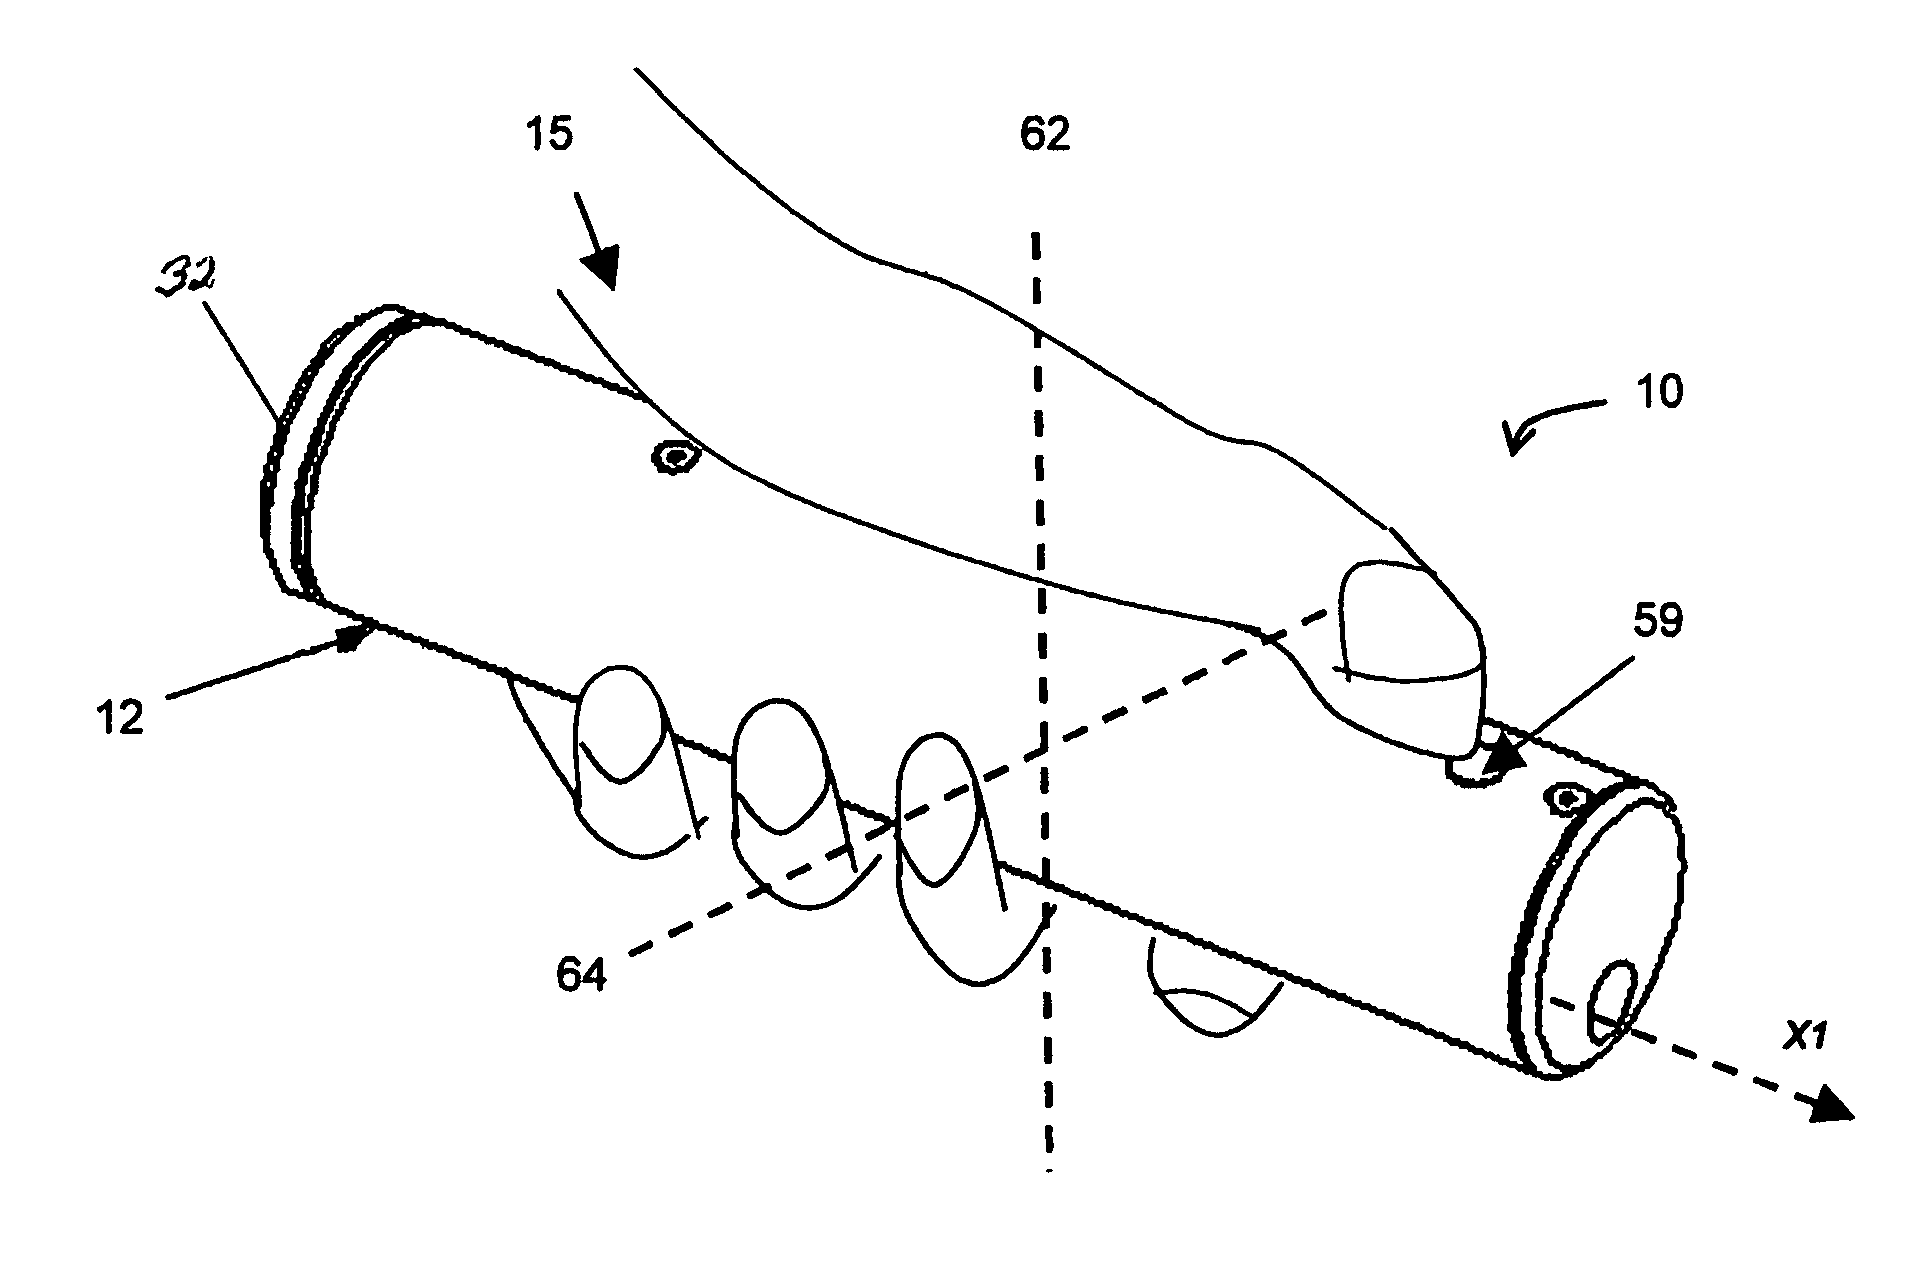 Stabilized mirror system for a handheld laser pointer